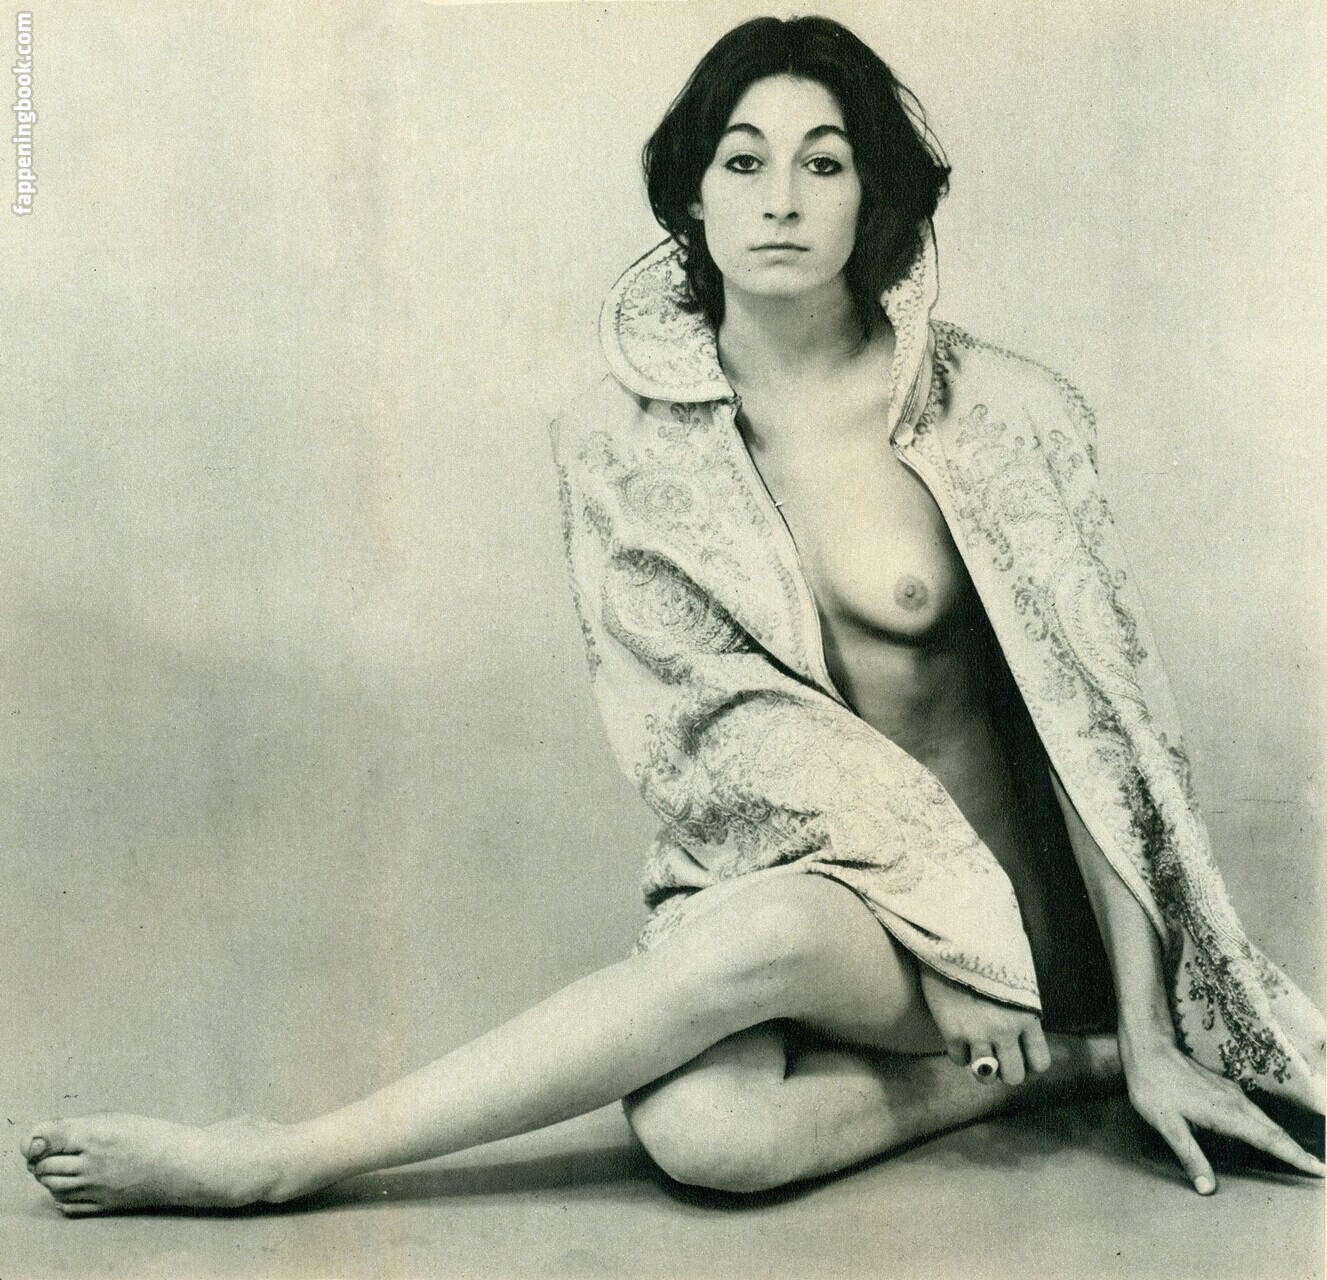 Anjelica Huston Nude The Fappening Photo Fappeningbook